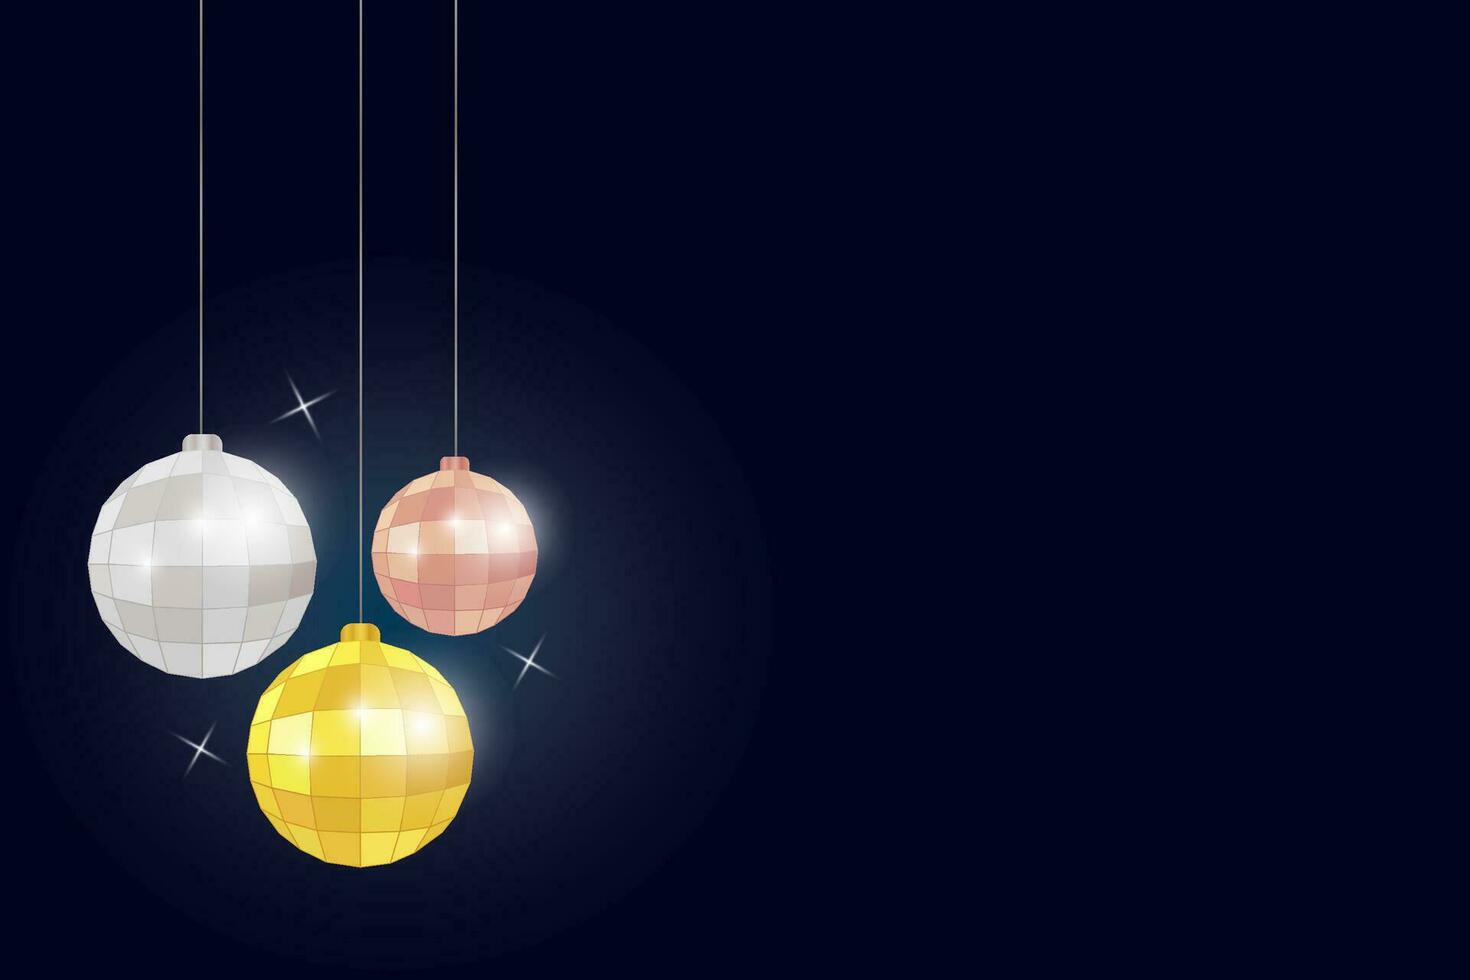 Christmas disco balls hanging on the string on the dark background with stars. Vector design.